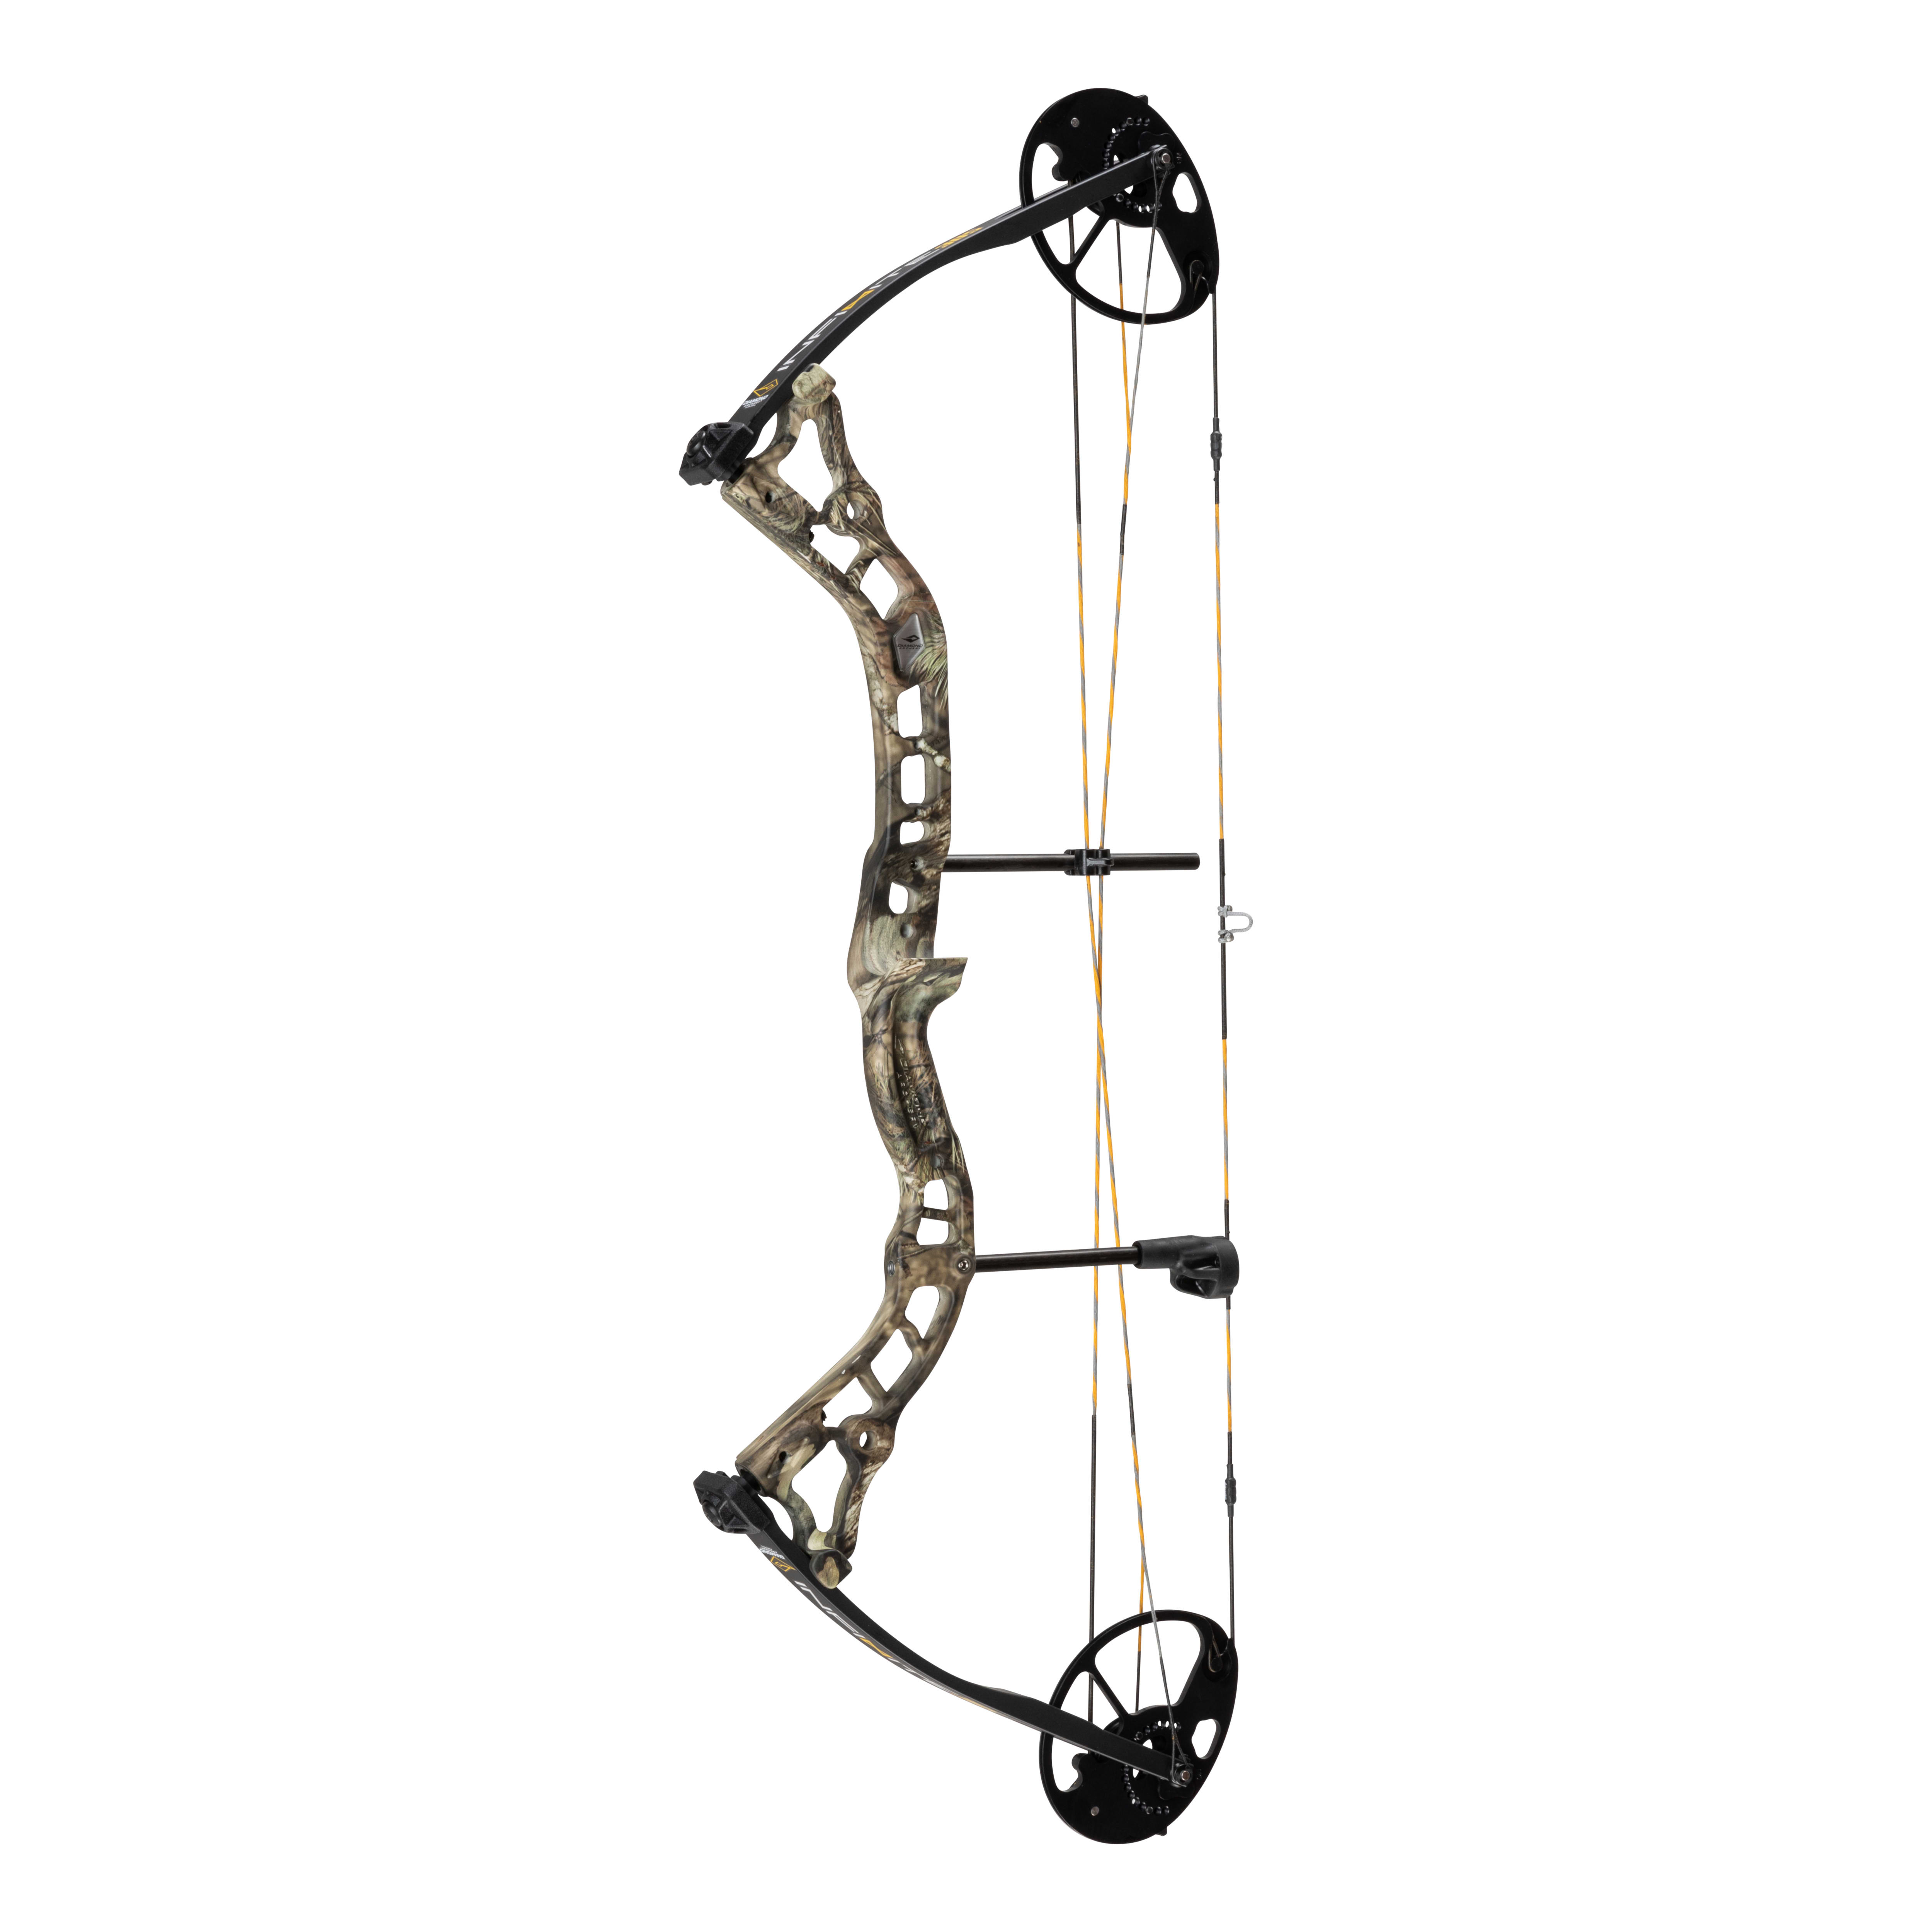 Diamond Infinite 305 Compound Bow Package - Mossy Oak Break-Up Country - Left